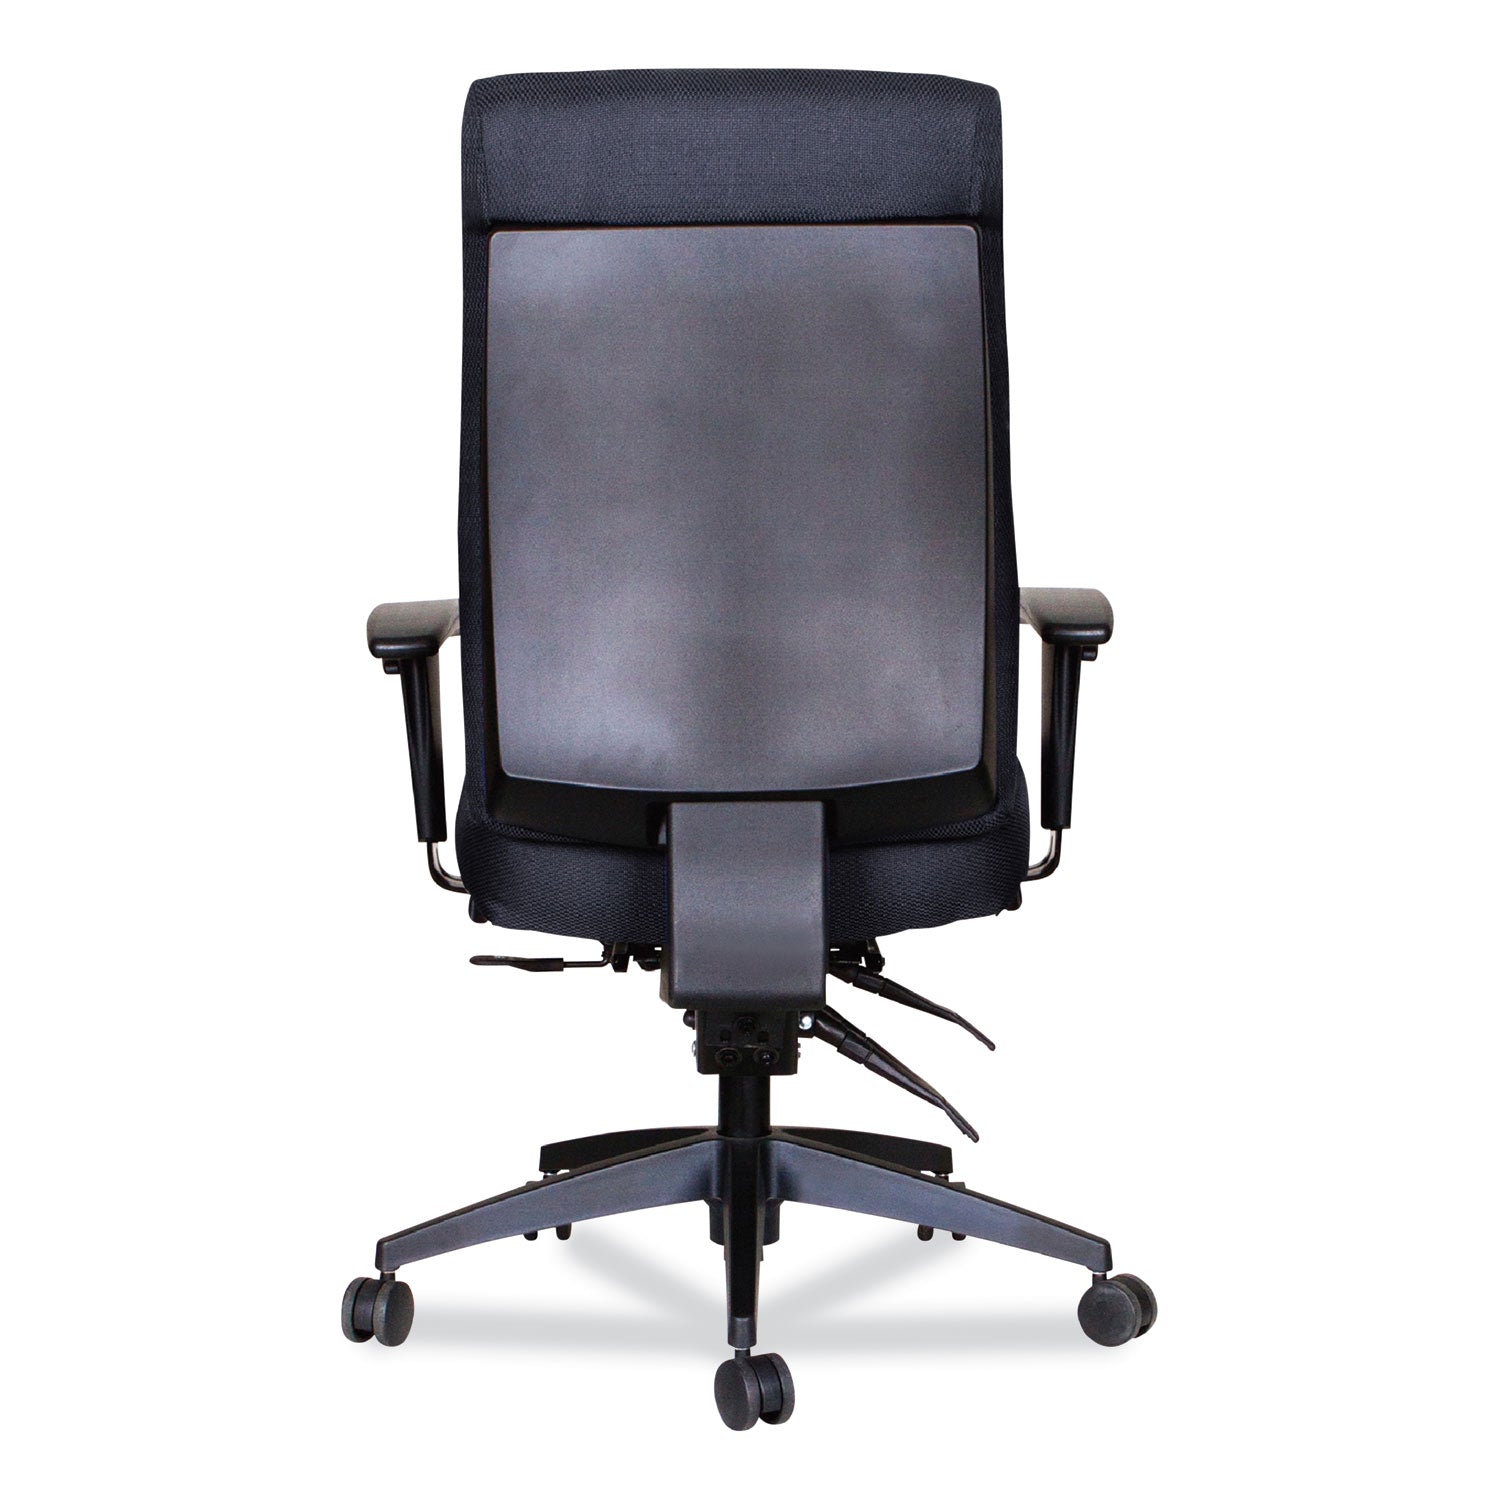 alera-wrigley-series-high-performance-high-back-synchro-tilt-task-chair-supports-275-lb-1724-to-2055-seat-height-black_alehps4101 - 6